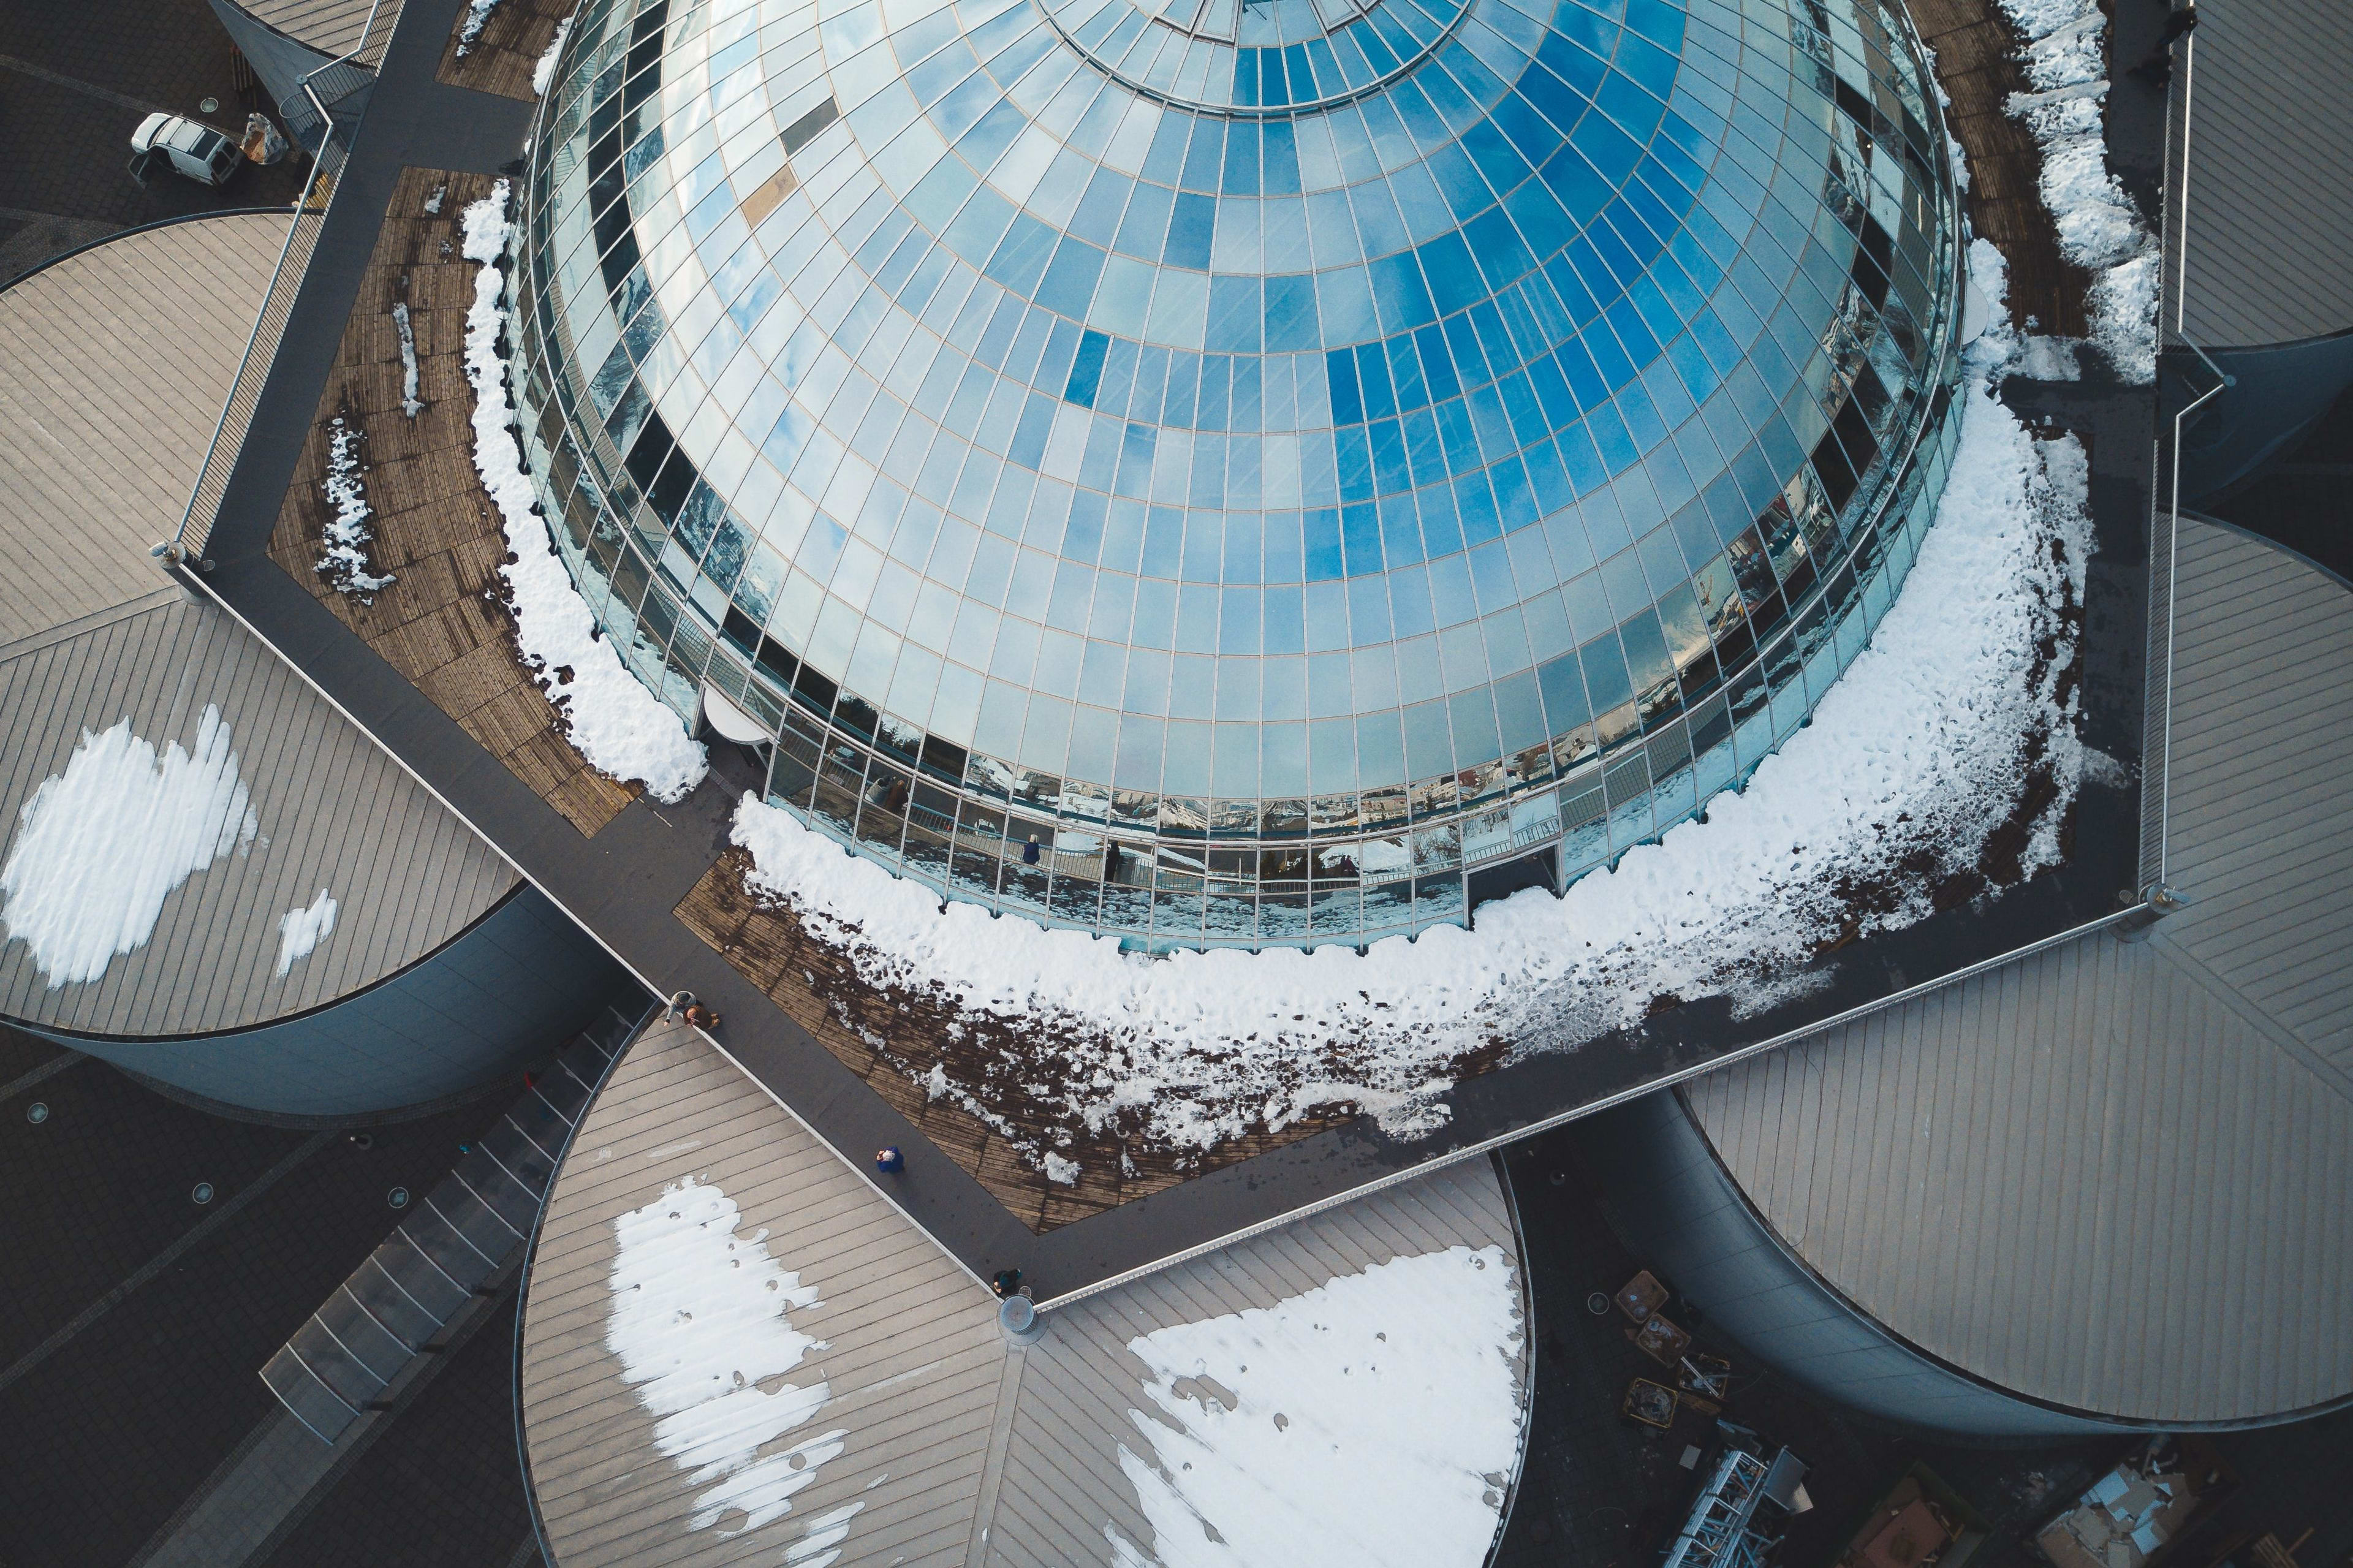 Perlan museum from above